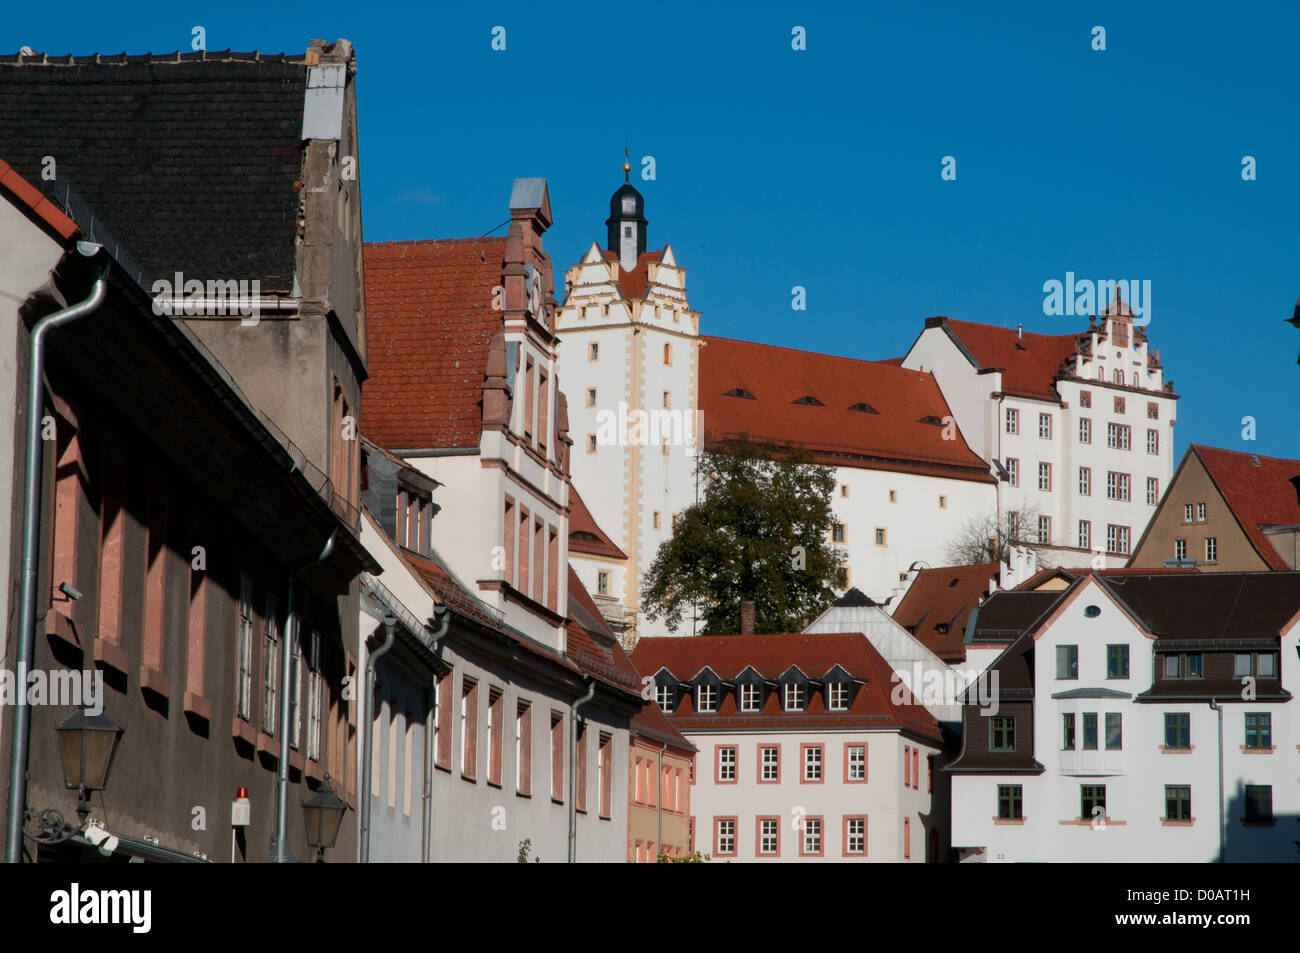 Colditz Castle, former Second World War POW camp, above town of Colditz, Saxony, Germany Stock Photo